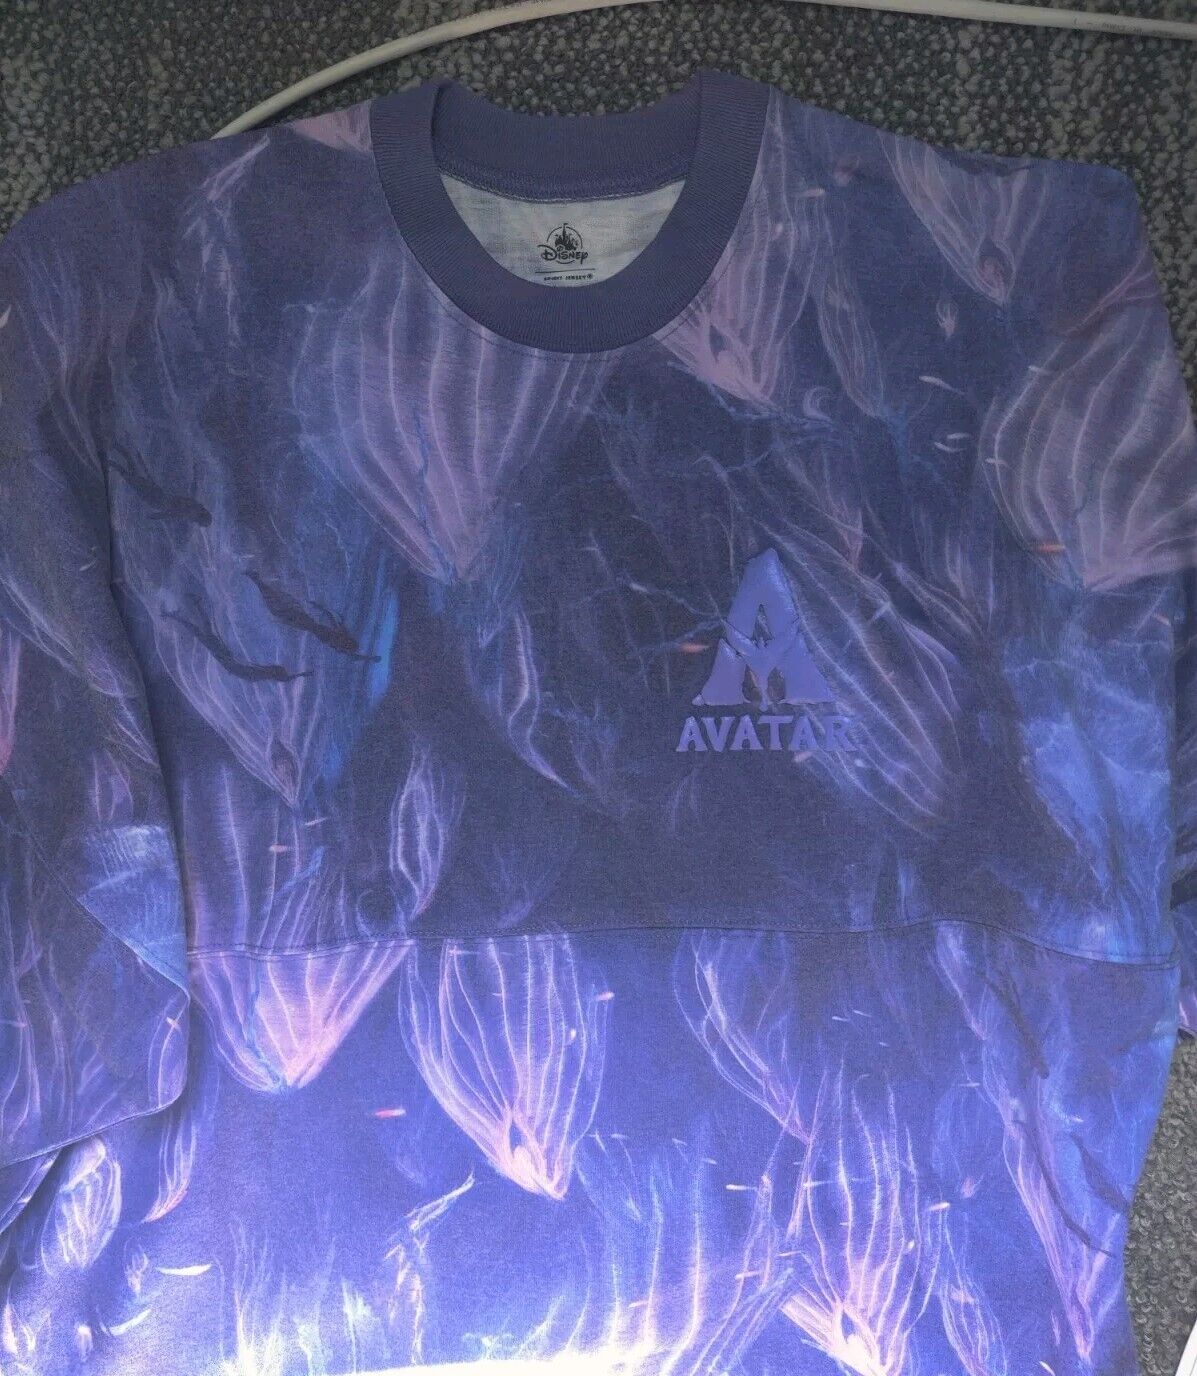 Avatar The Way Of The Water Disney Parks Spirit Jersey - Size L 